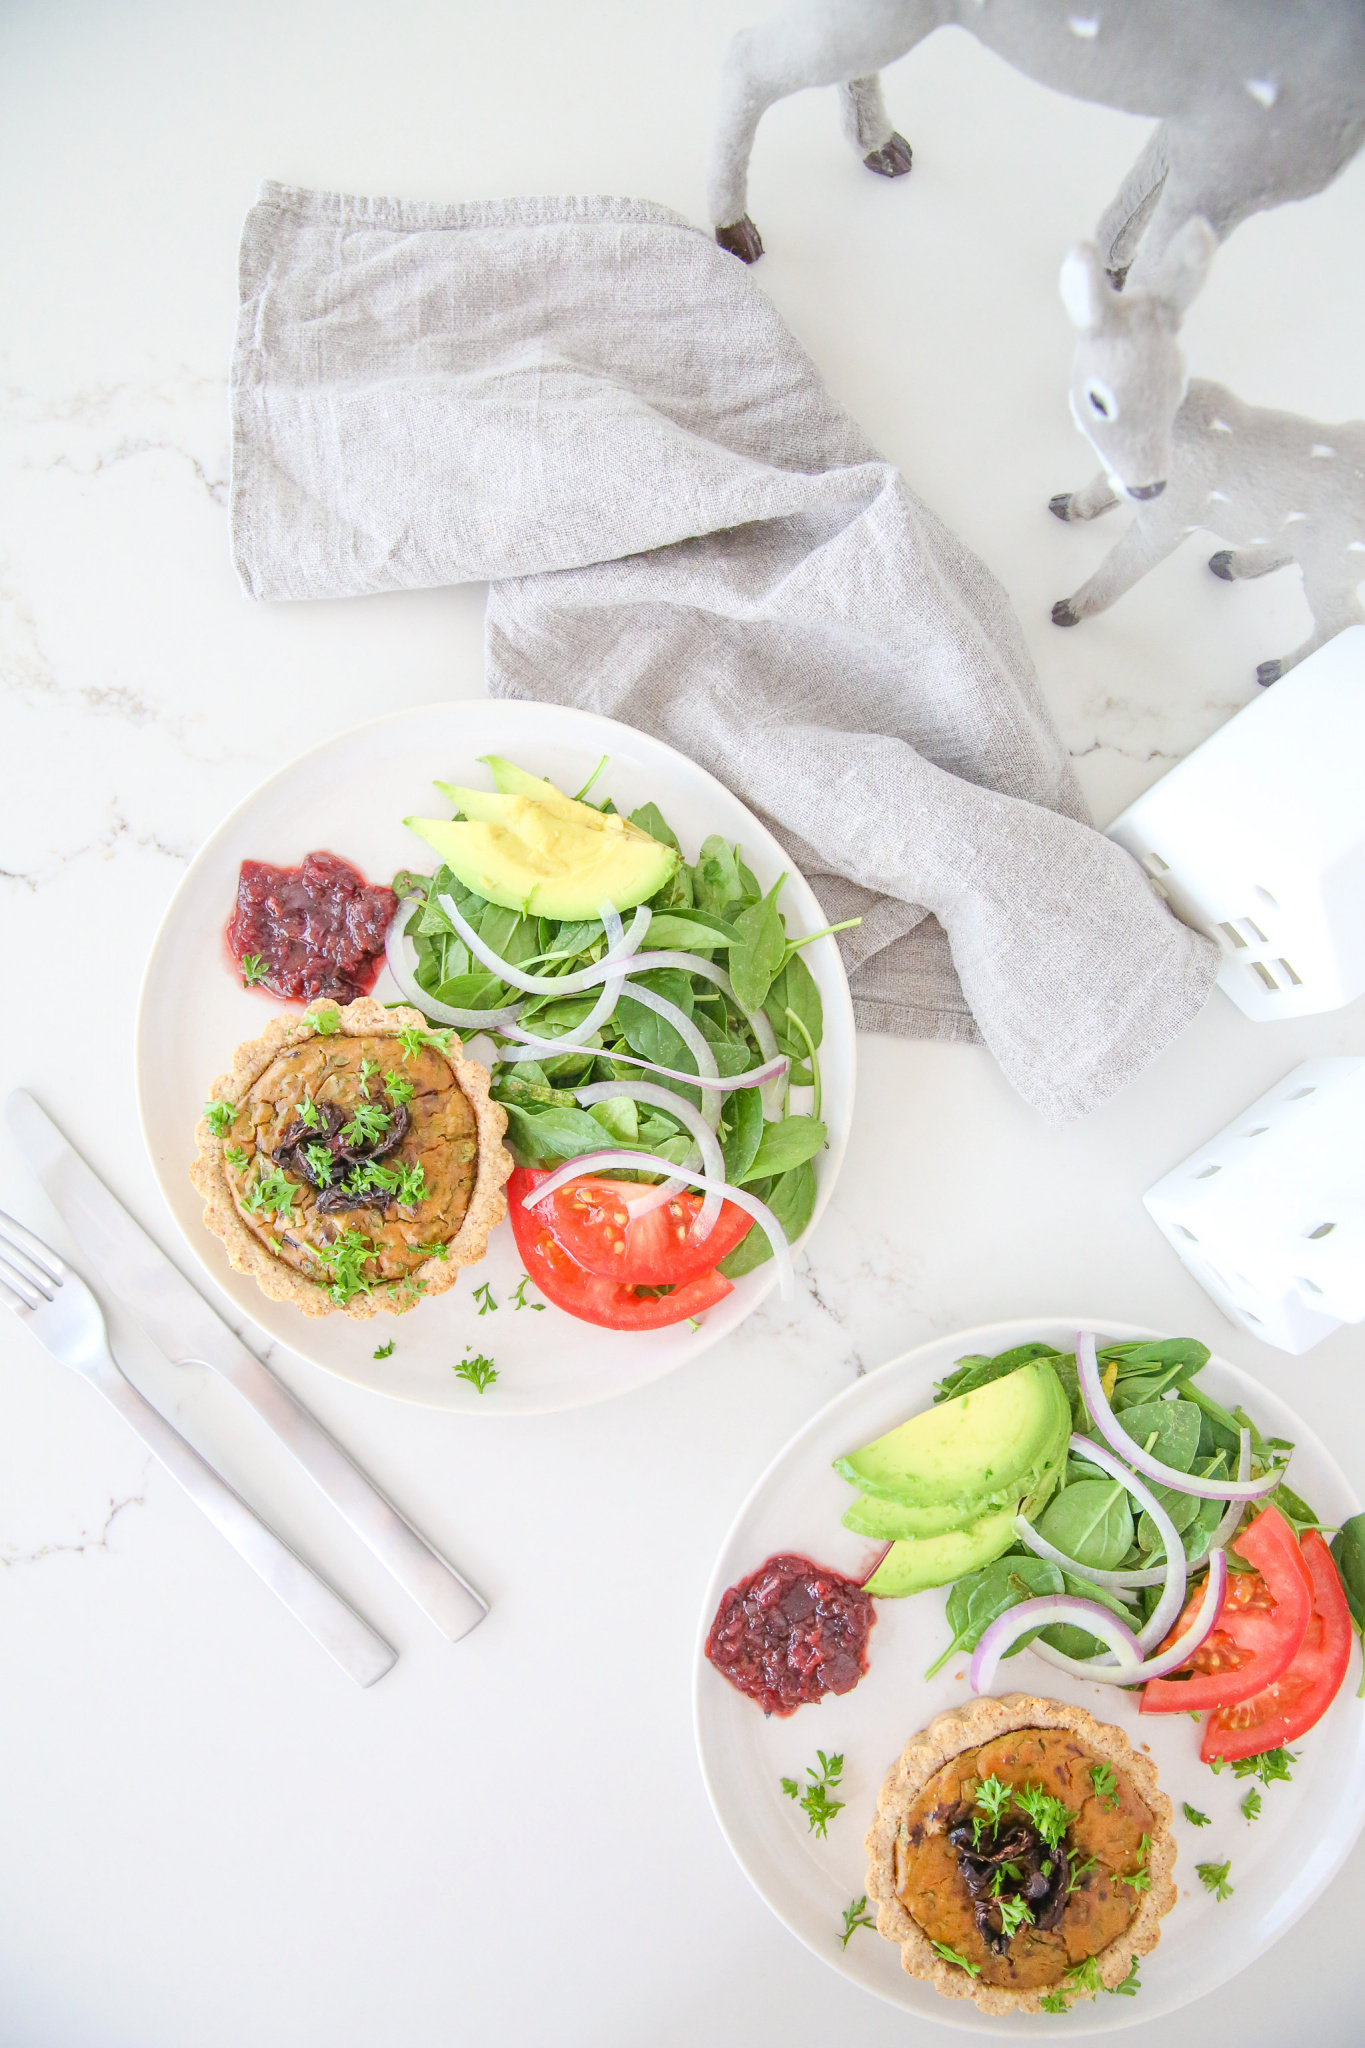 Vegan mini quiches topped with relish, parsley, salad, red onion, tomato, and avocado